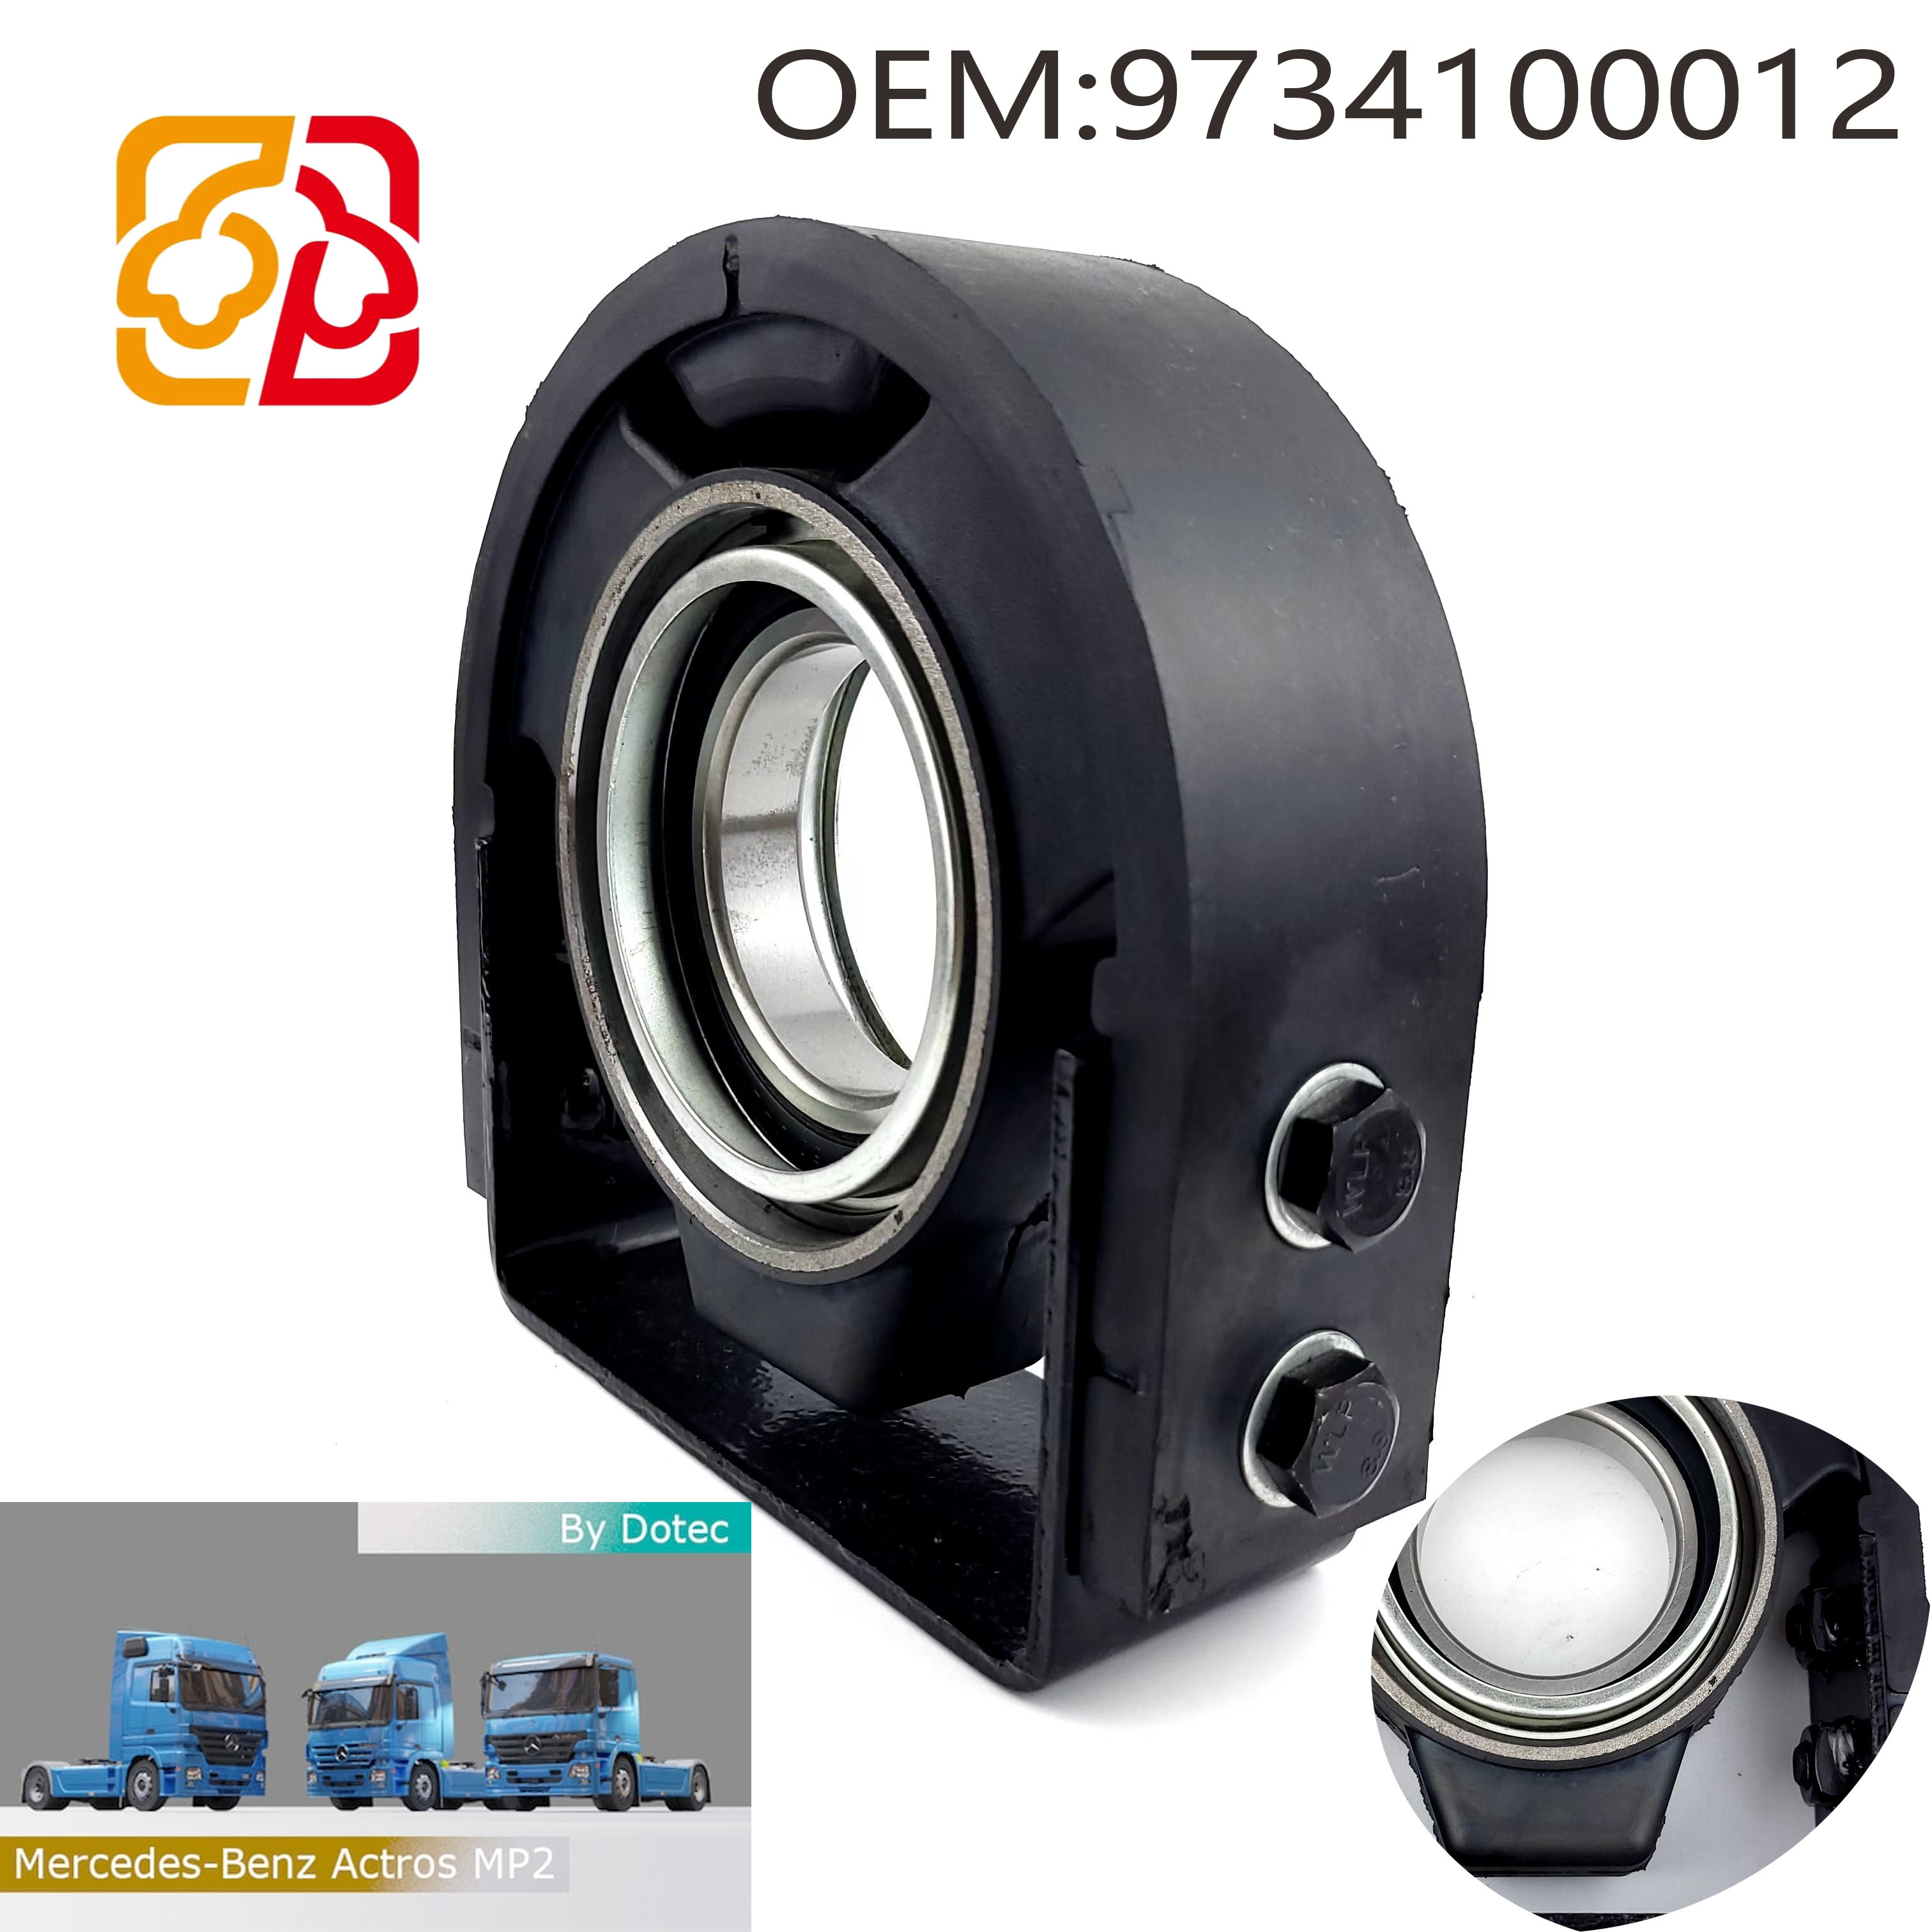 For Mercedes-Benz Trucks High Quality Drive Shaft Center Support Bearings 6564110012 9734100112 9734100012 3954100660